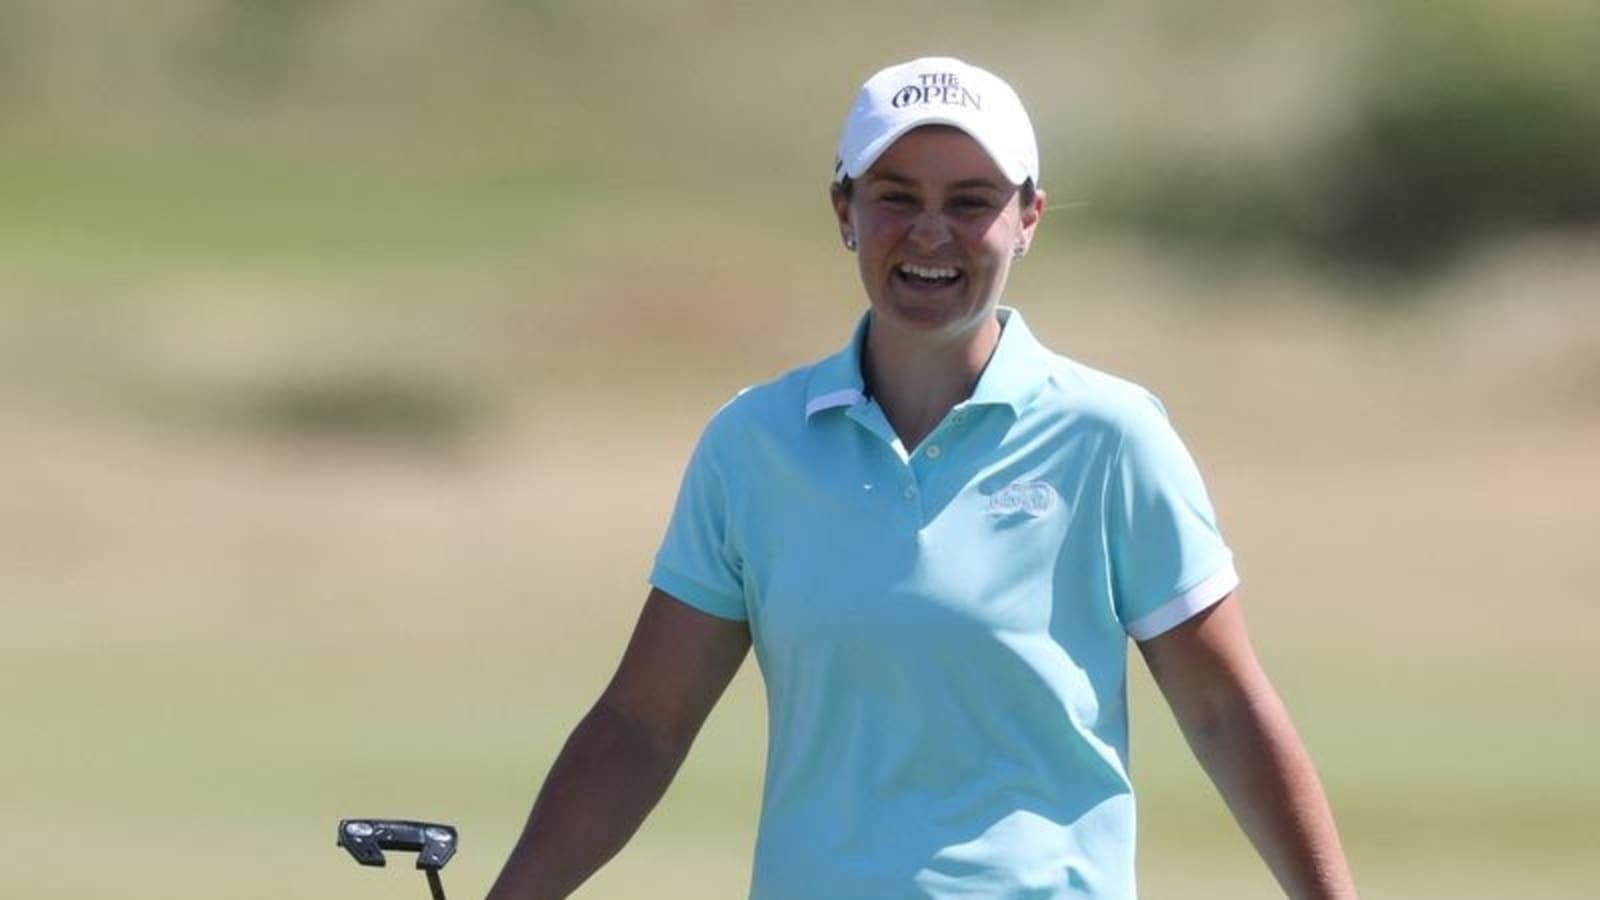 Barty does not regret retirement, has no plans to become pro golfer